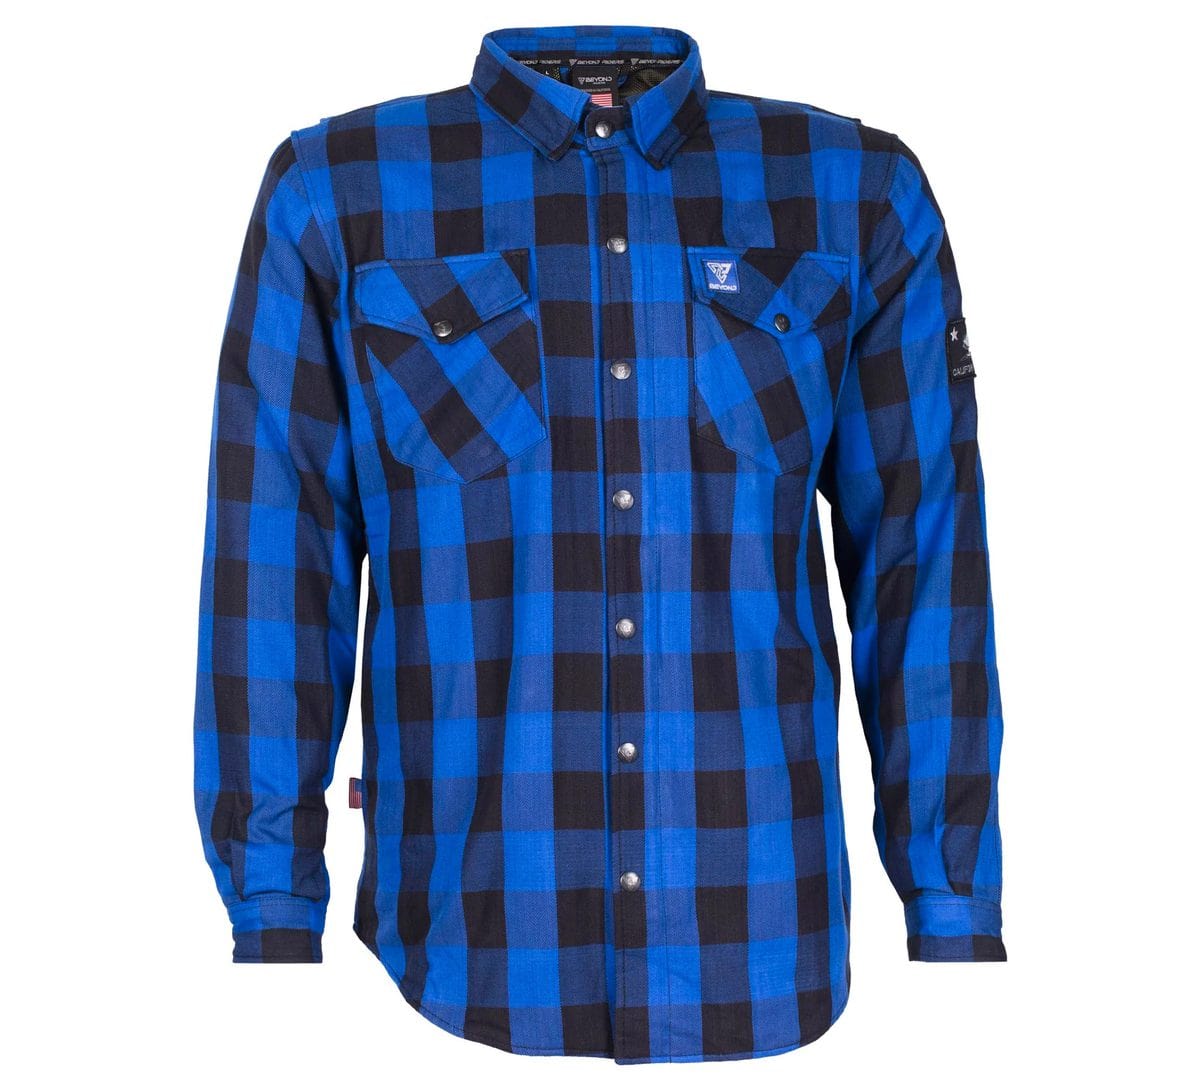 Protective Flannel Shirt - Blue Checkered with Pads